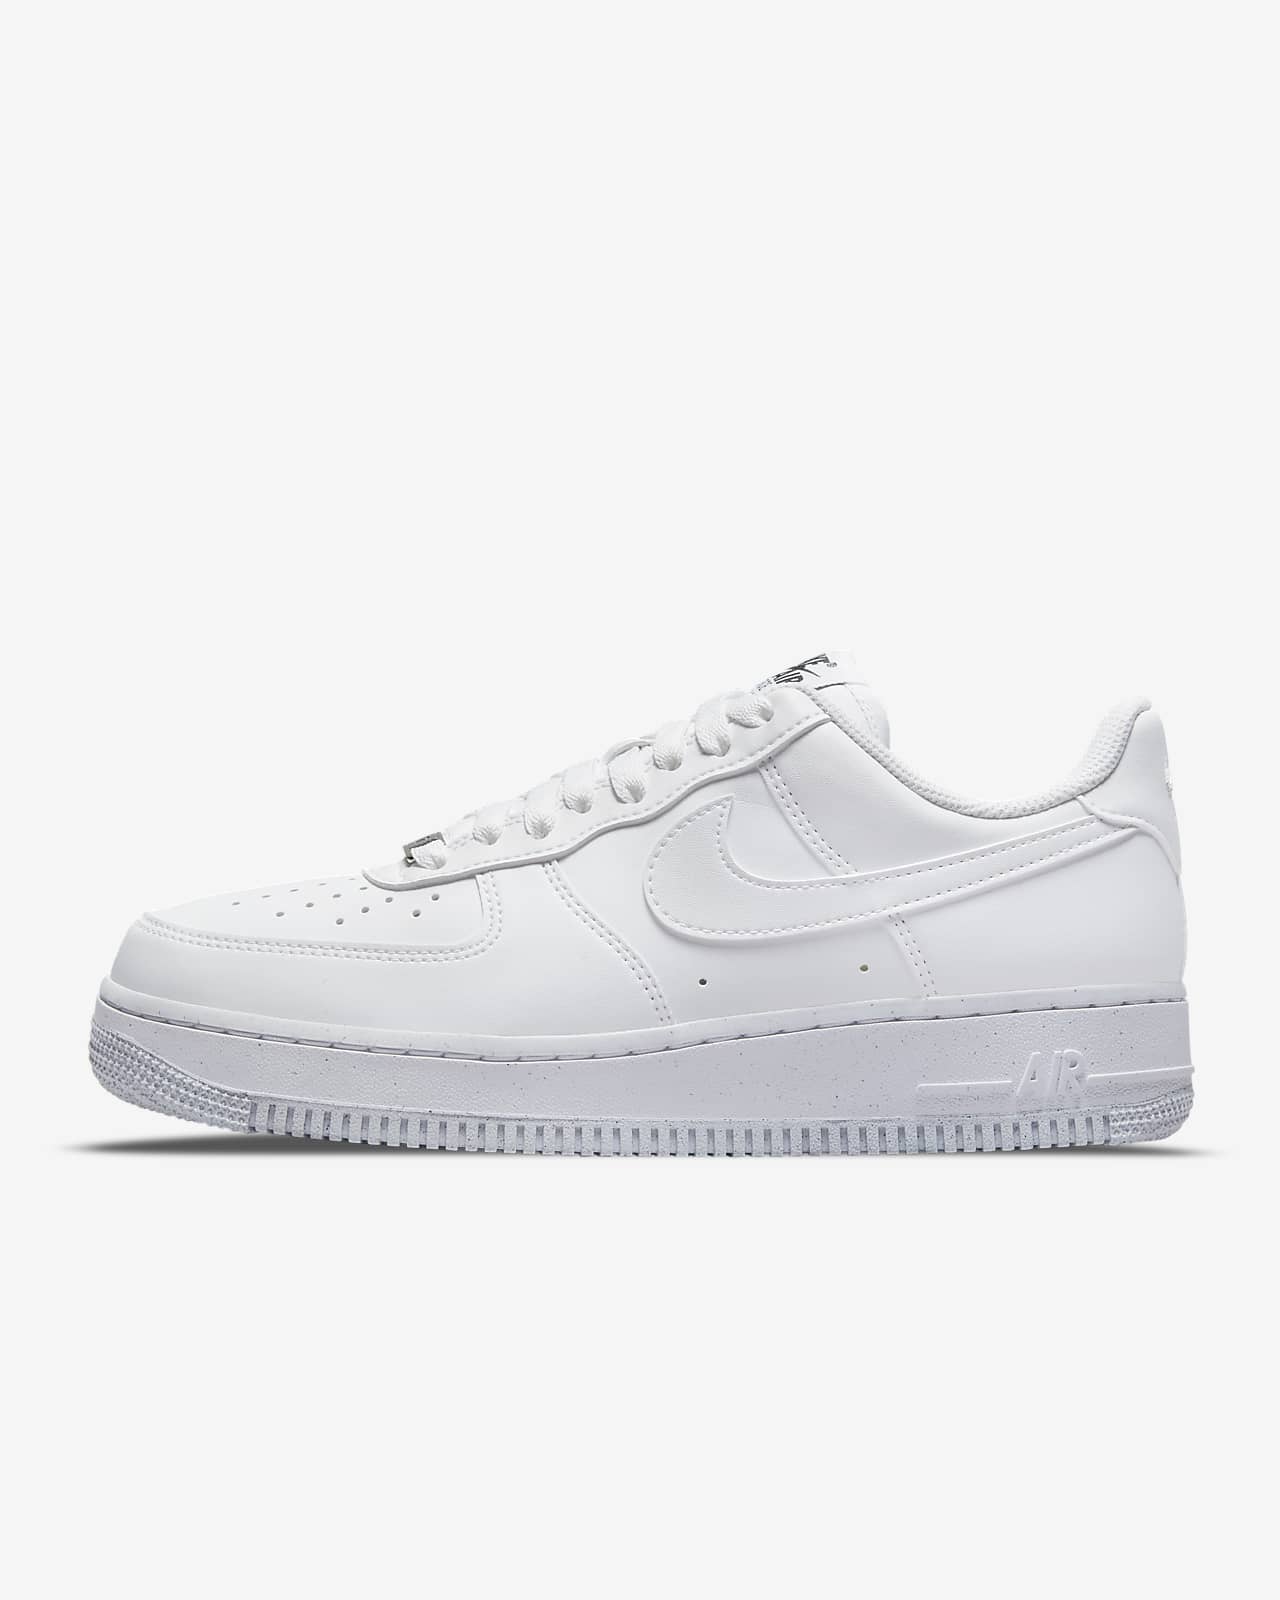 Center Bull Grudge Nike Air Force 1 '07 Next Nature Women's Shoes. Nike.com